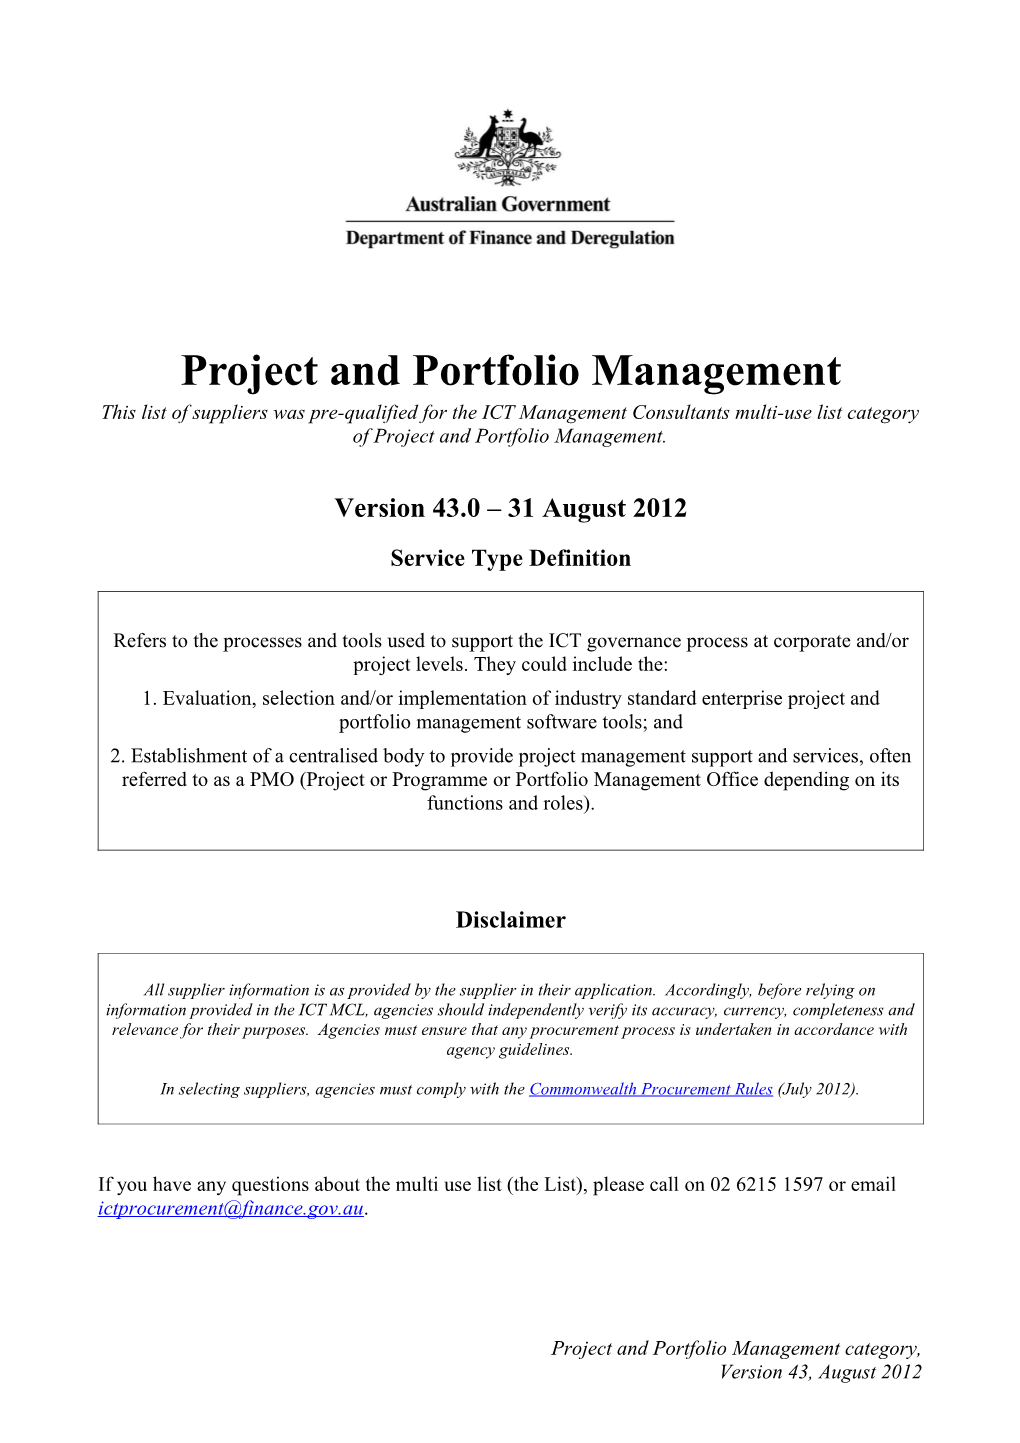 Management Consultants Multi Use List Suppliers of Project and Portfolio Management Services